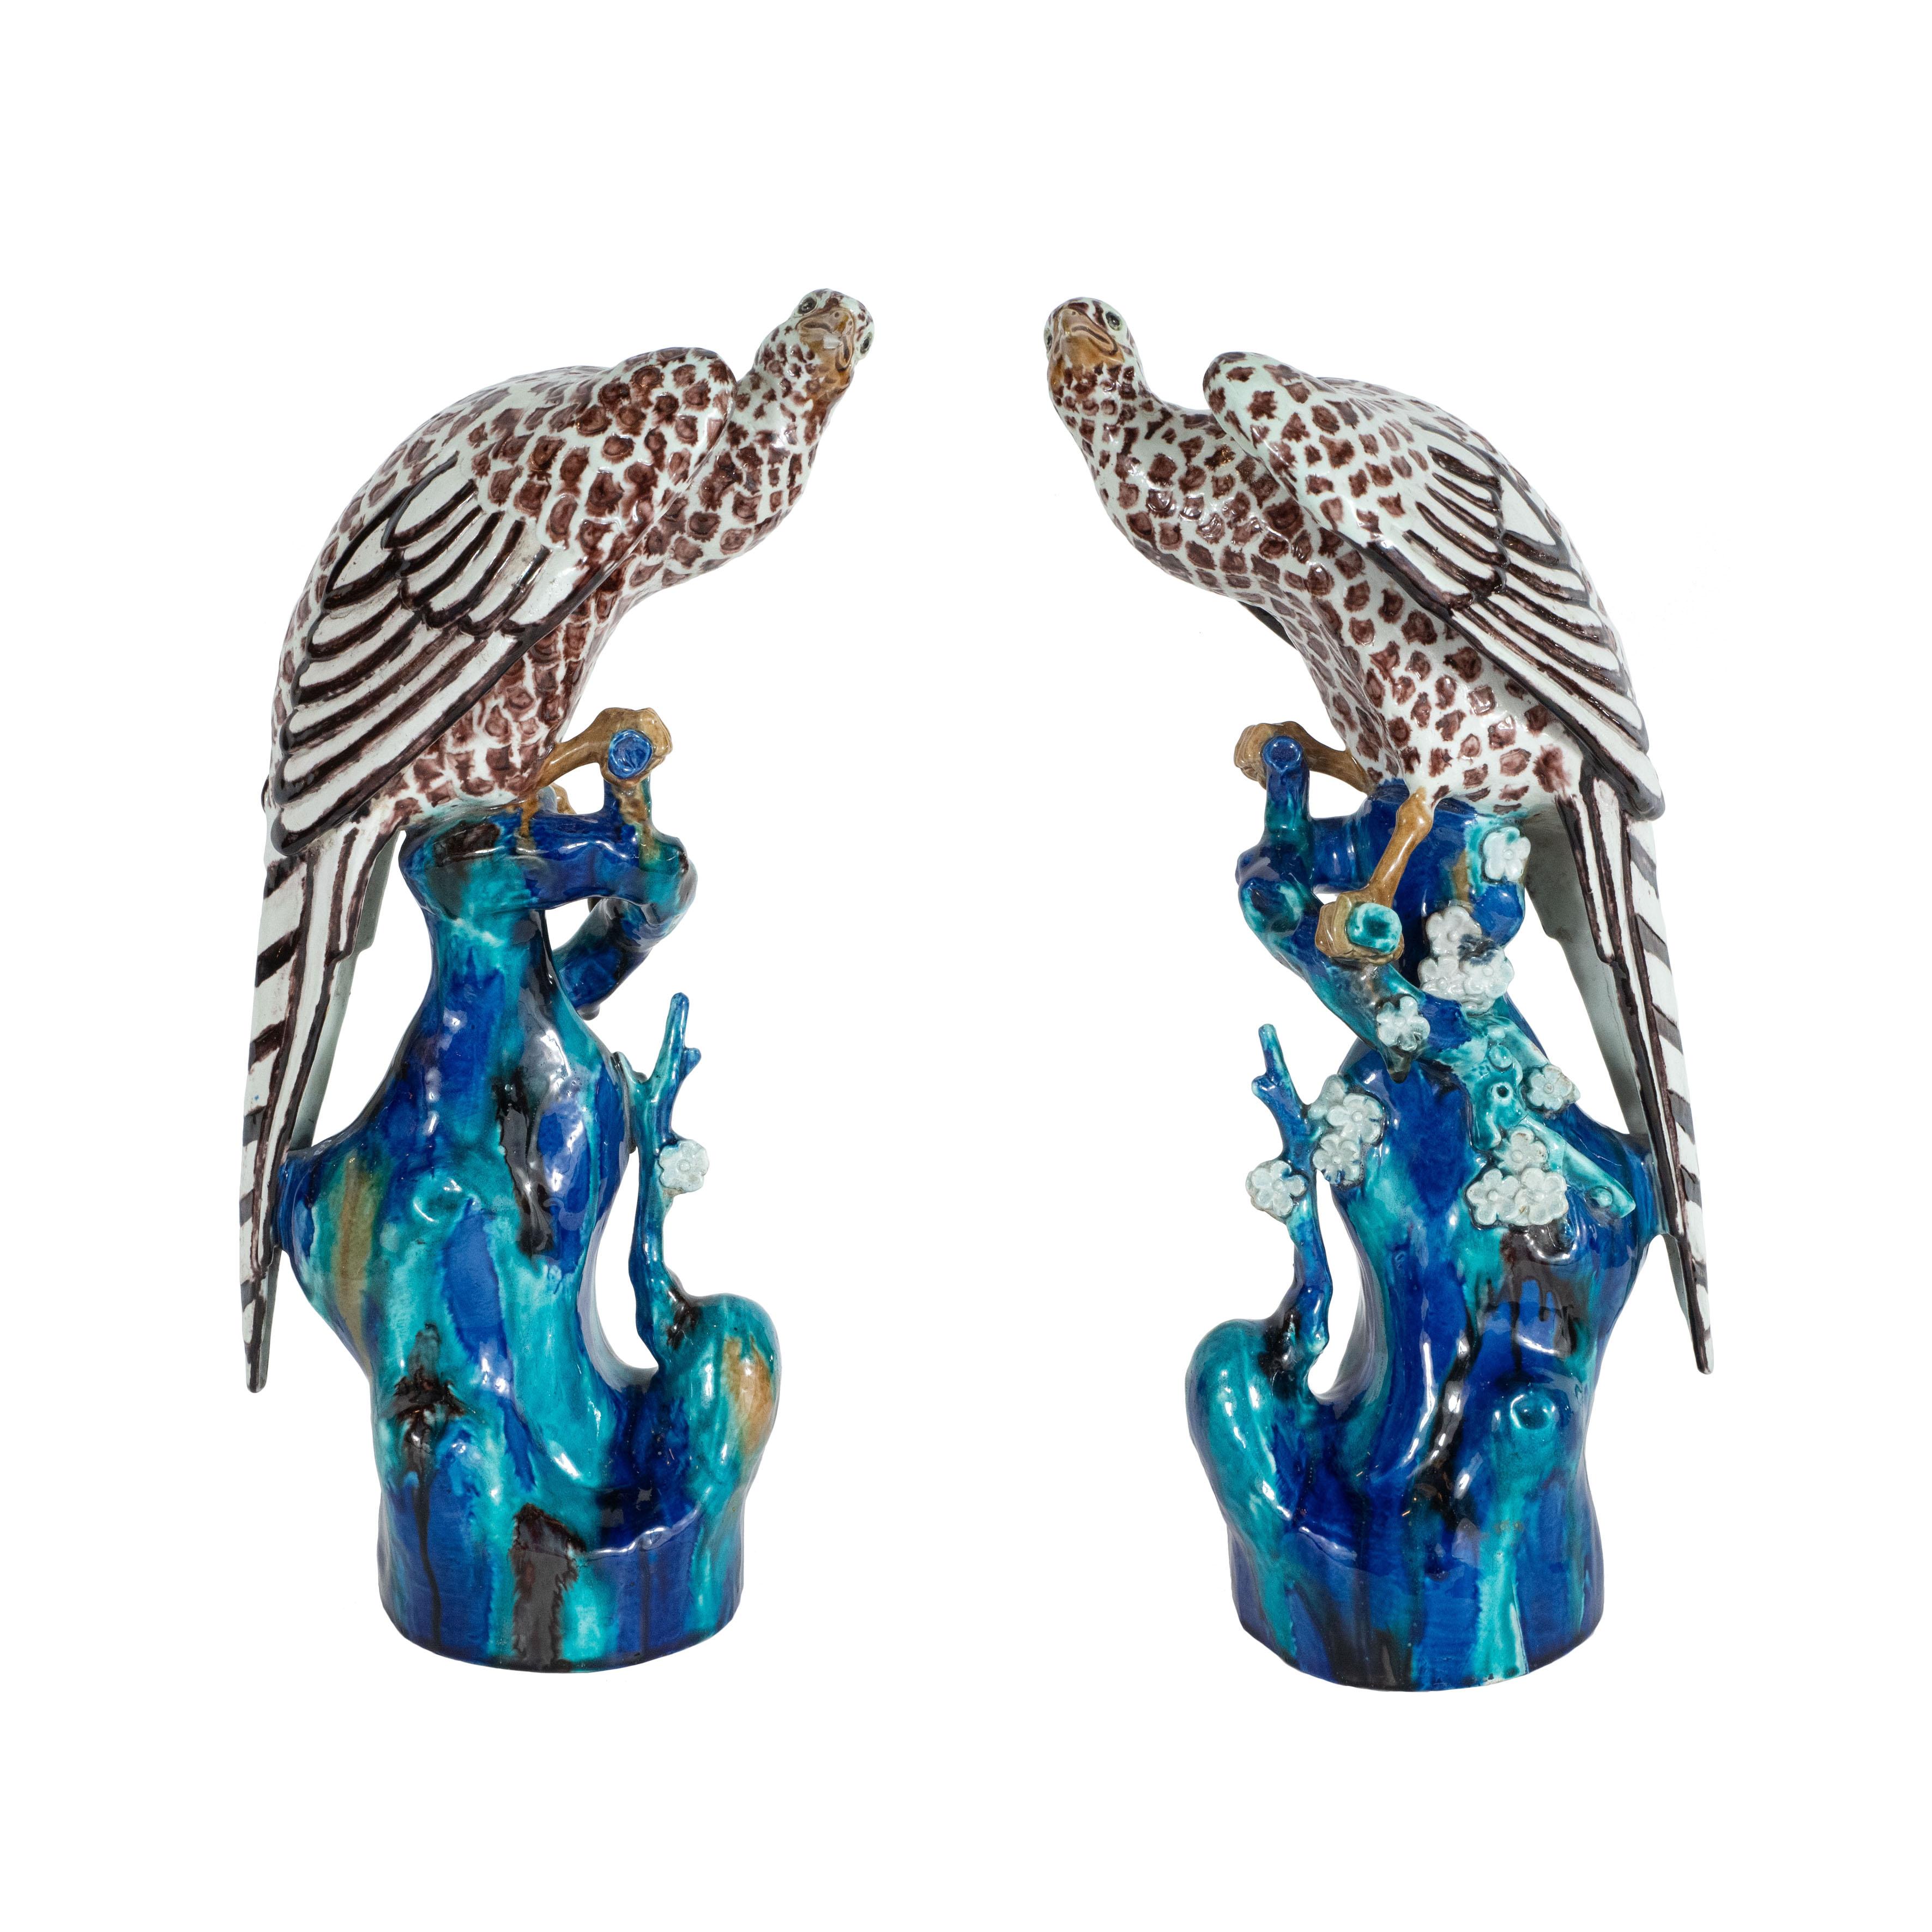 Exquisite Pair of French Art Deco Hand Painted and Glazed Ceramic Falcons